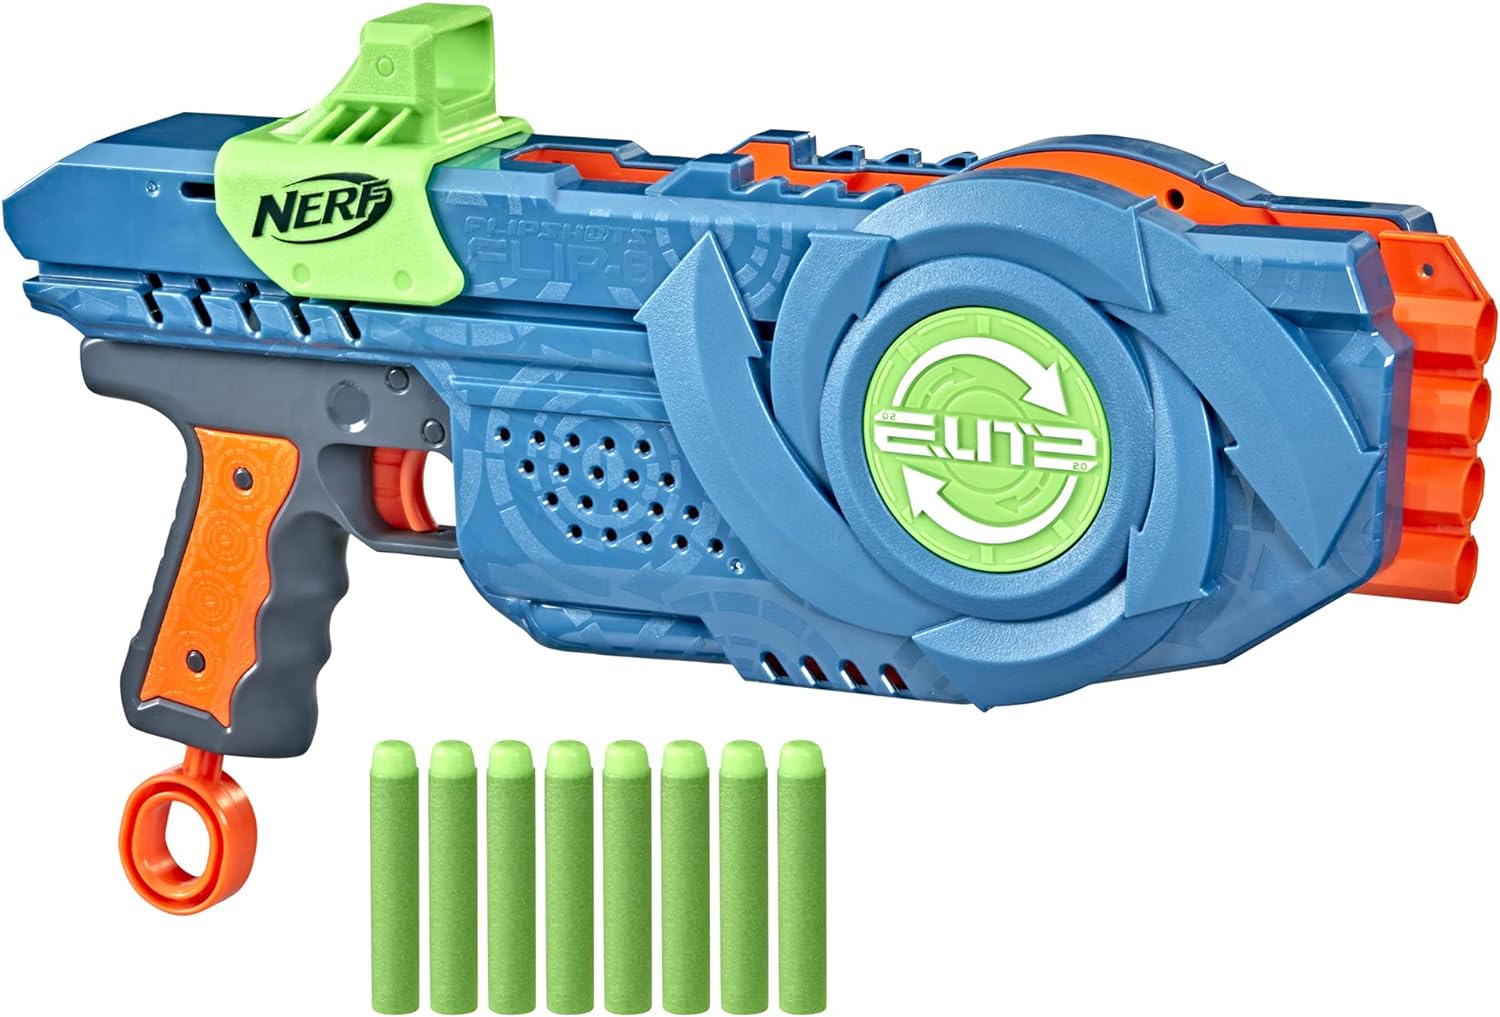 Great gift for nerf lovers. Lots of fun. Good buy